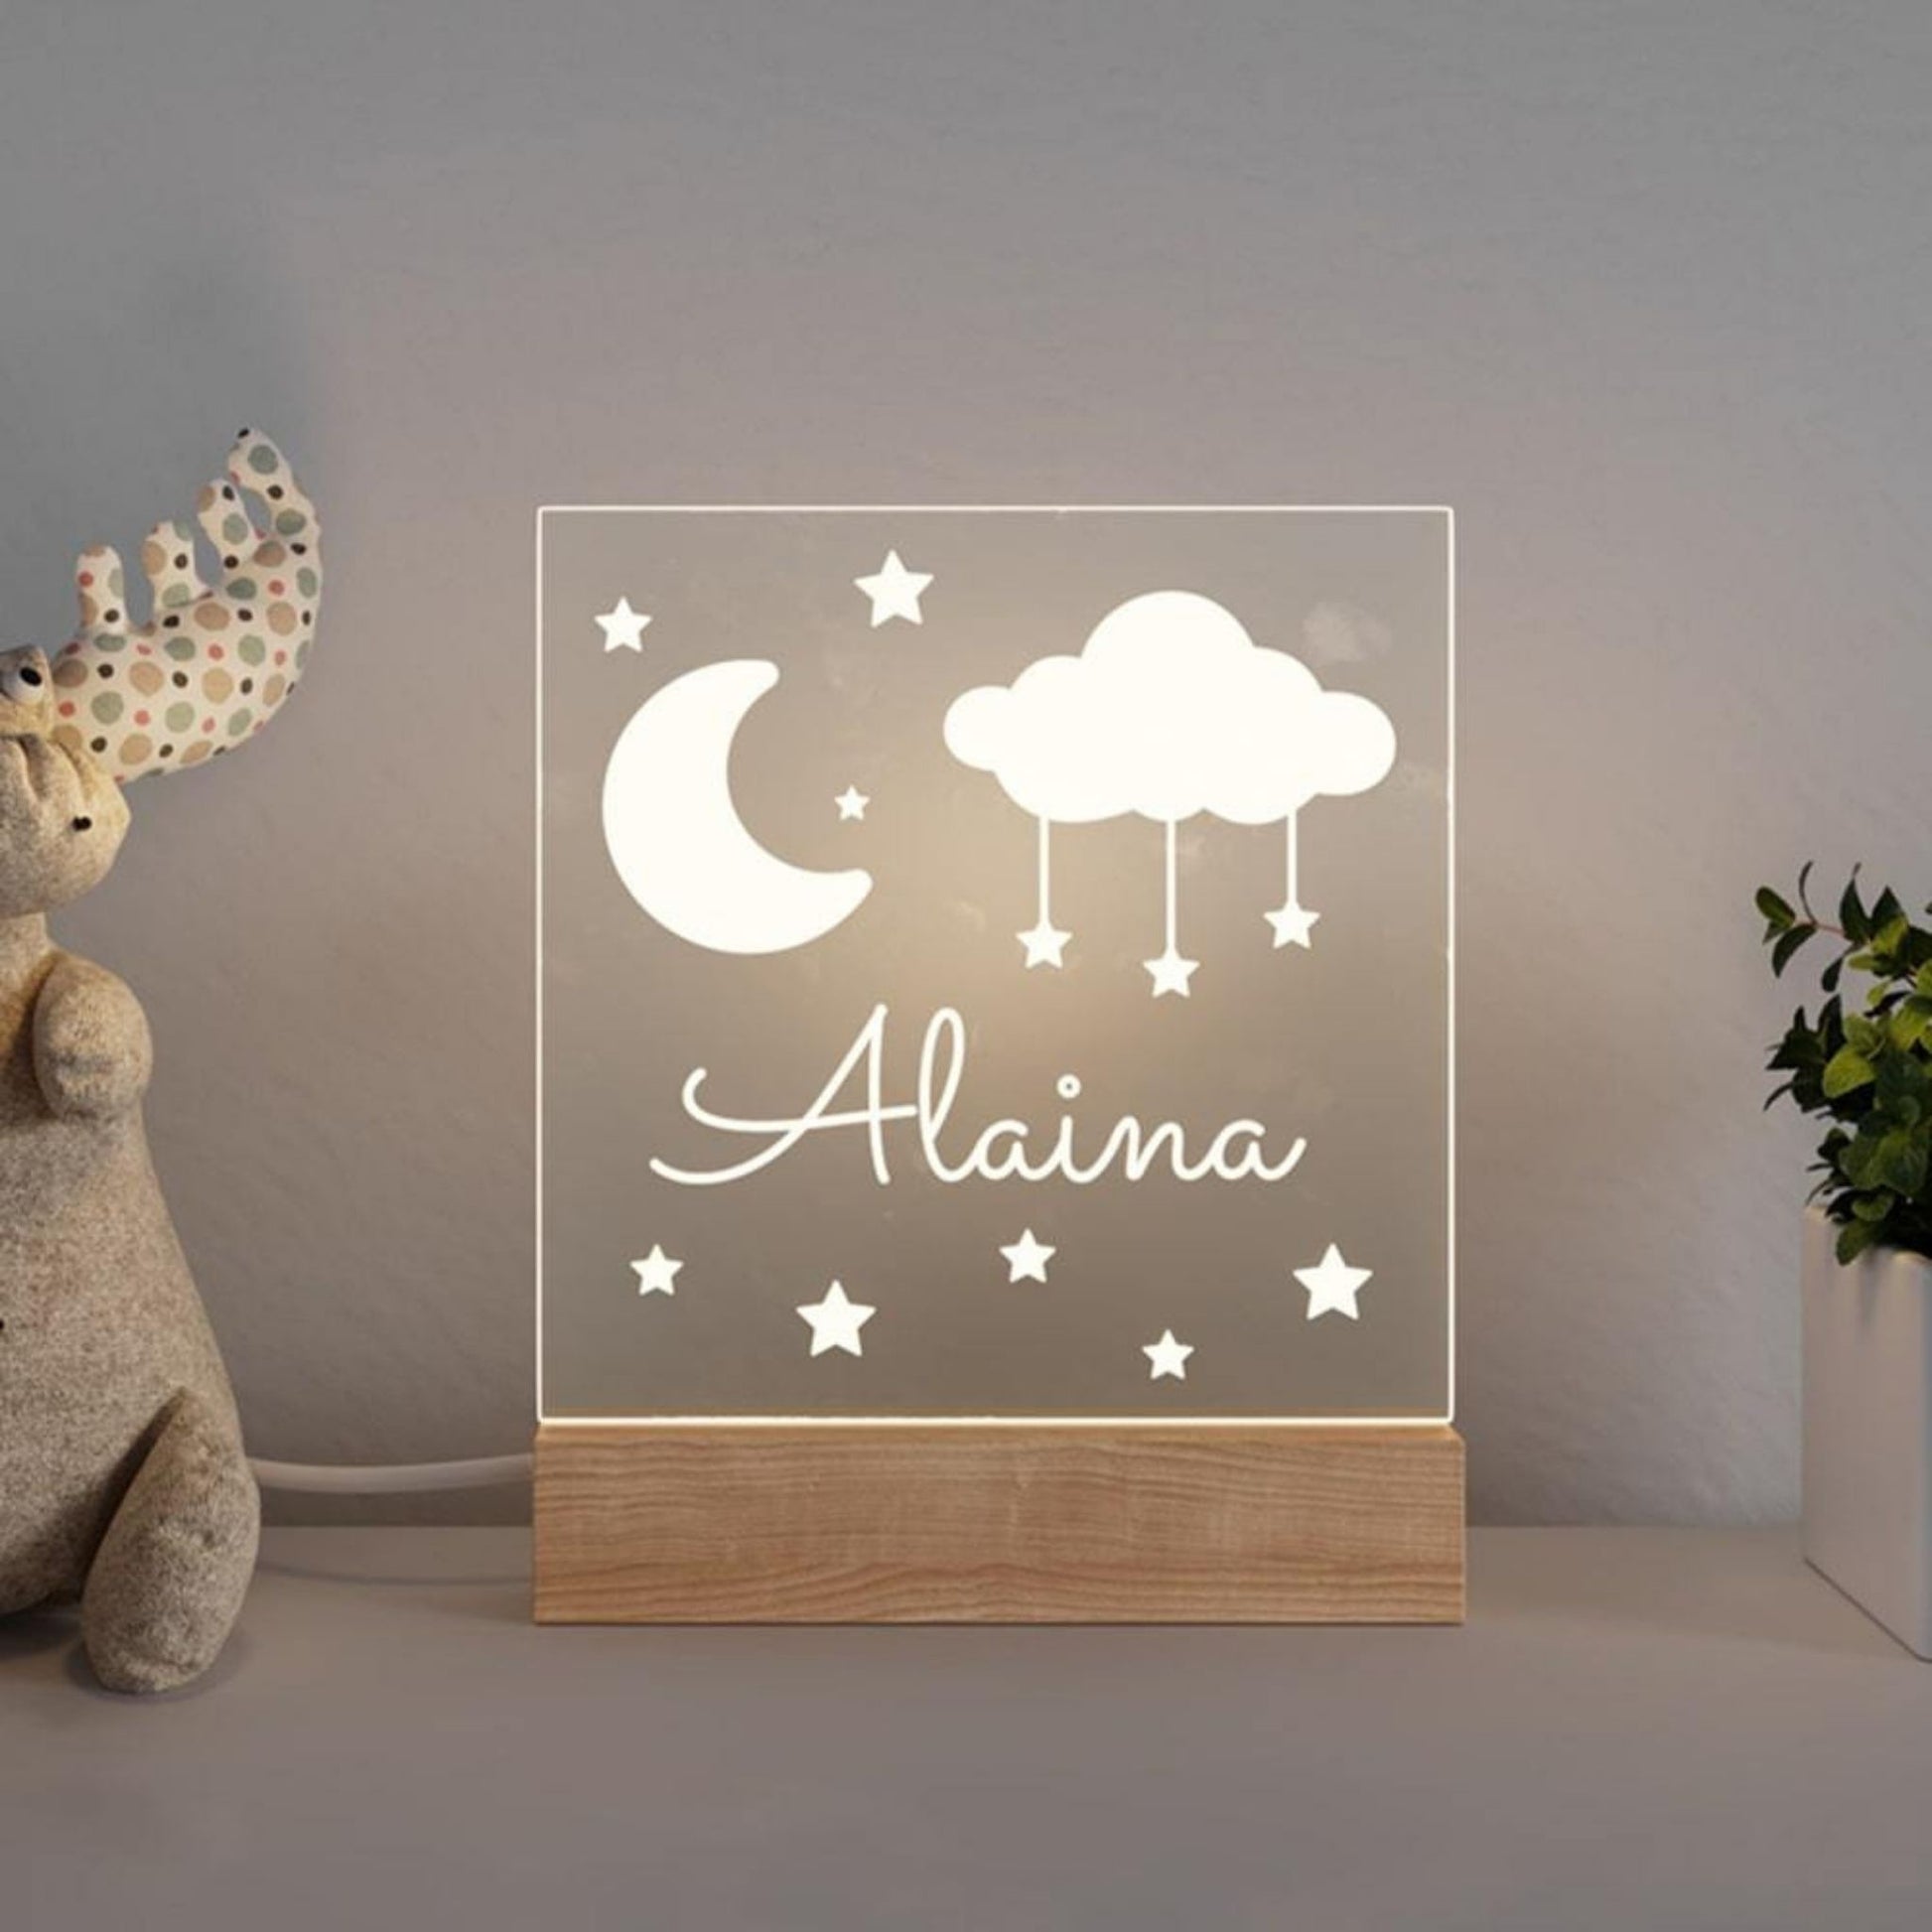 Sweet Dreams My Baby - Personalized LED Light – Macorner